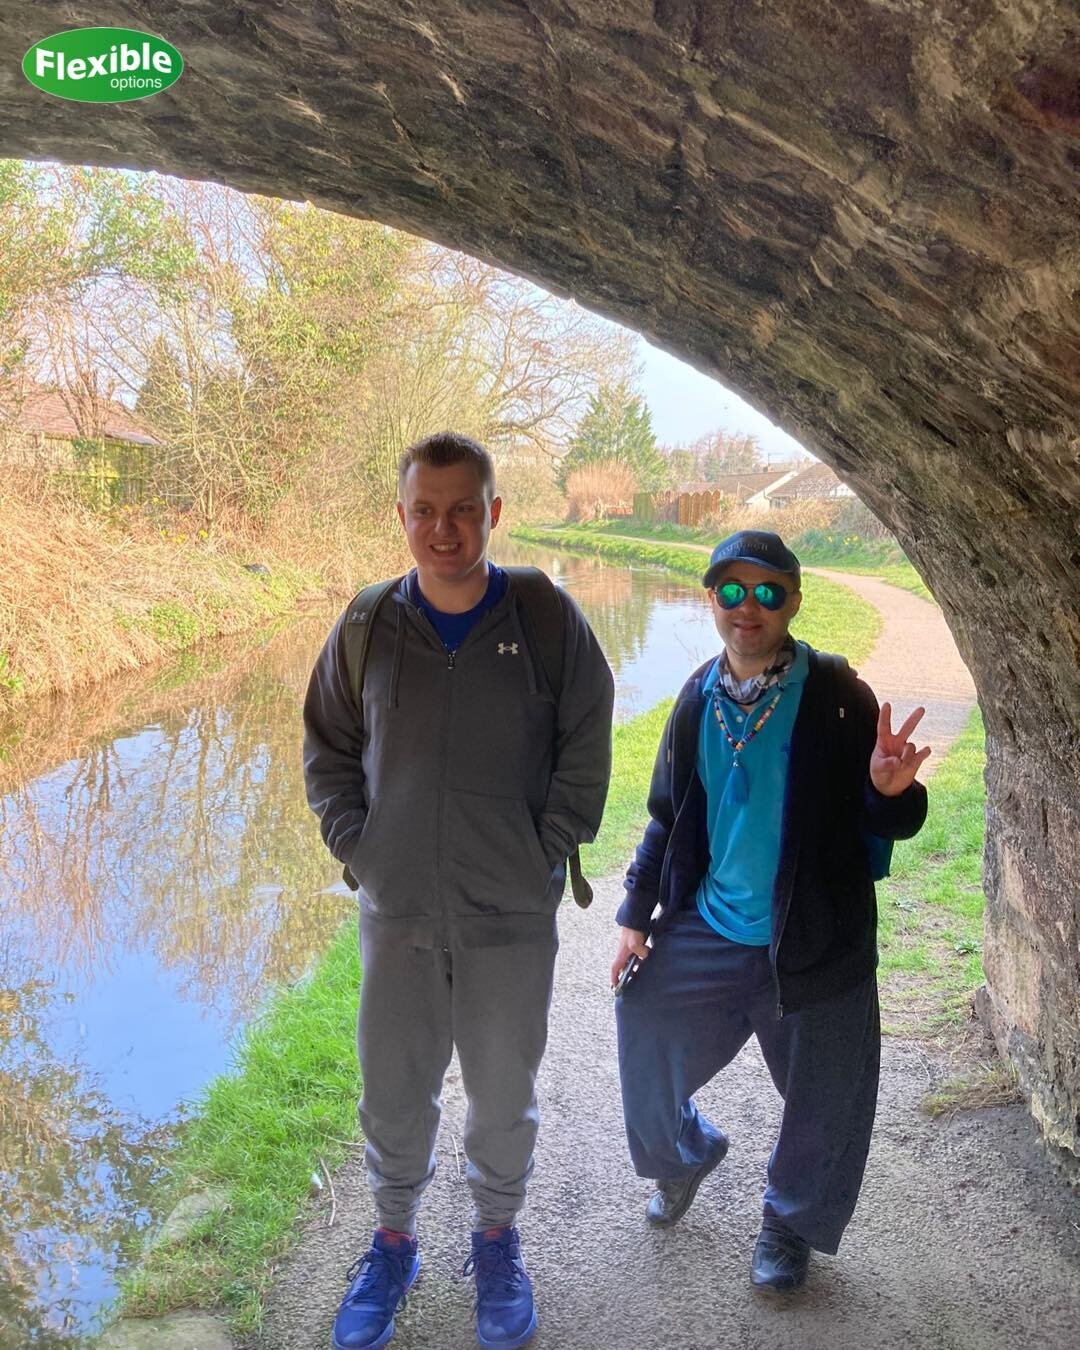 Alex and Luke have been having a bit of an explore of the canal in Pontypool. They did 6k steps before they made it to their first pit stop. Well played lads, that&rsquo;s some distance. Ace.

#walking #explore #canal #learningdisabilities